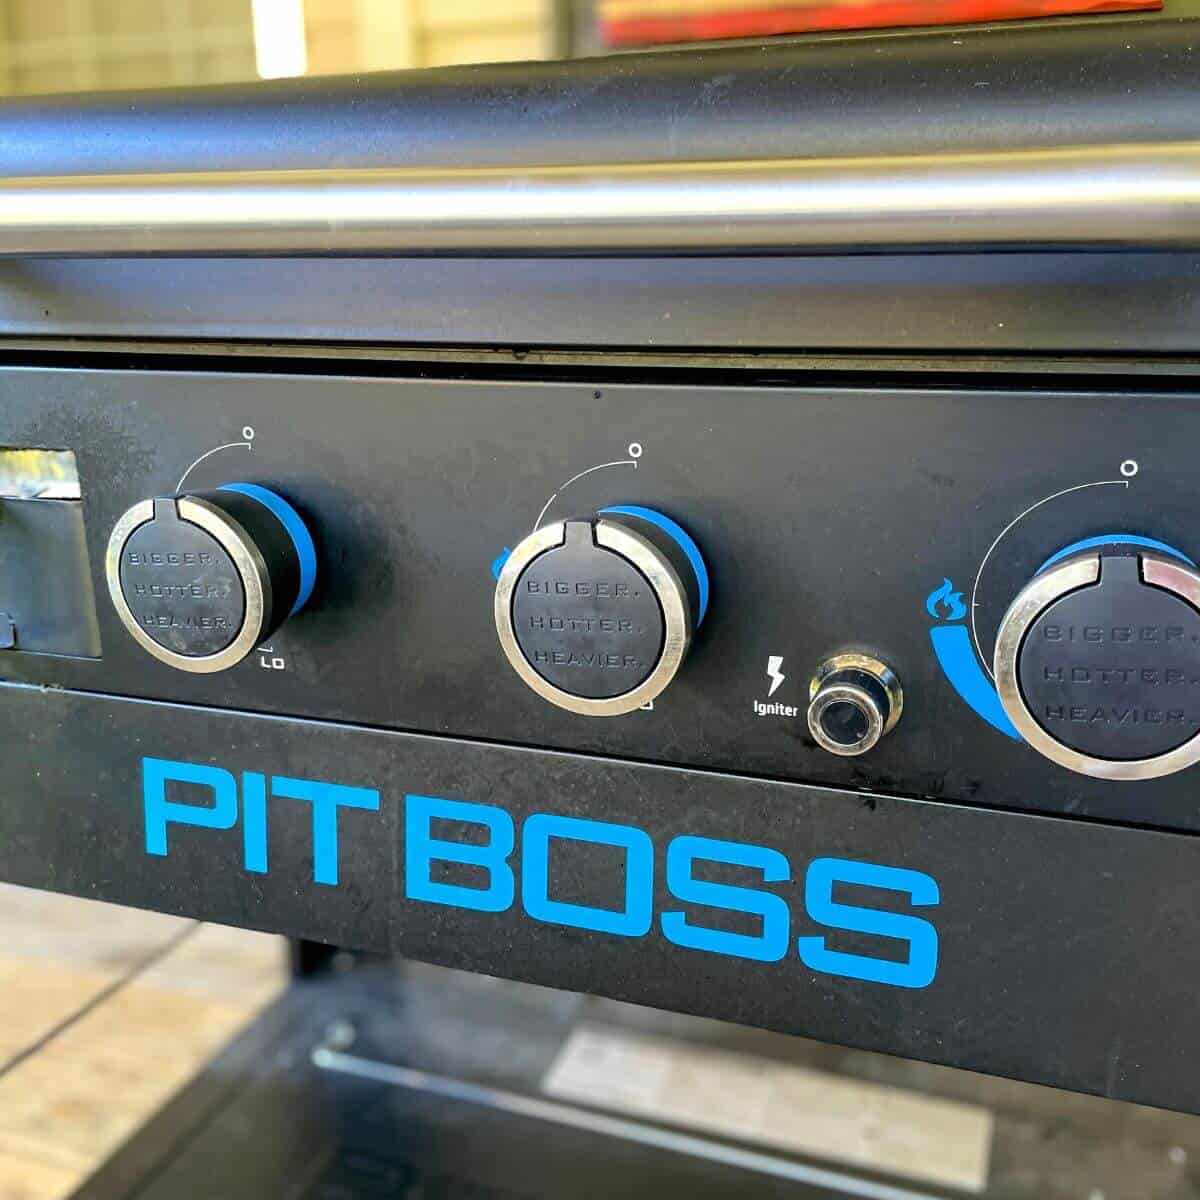 https://theflattopking.com/wp-content/uploads/2022/09/pit-boss-griddle-review.jpg